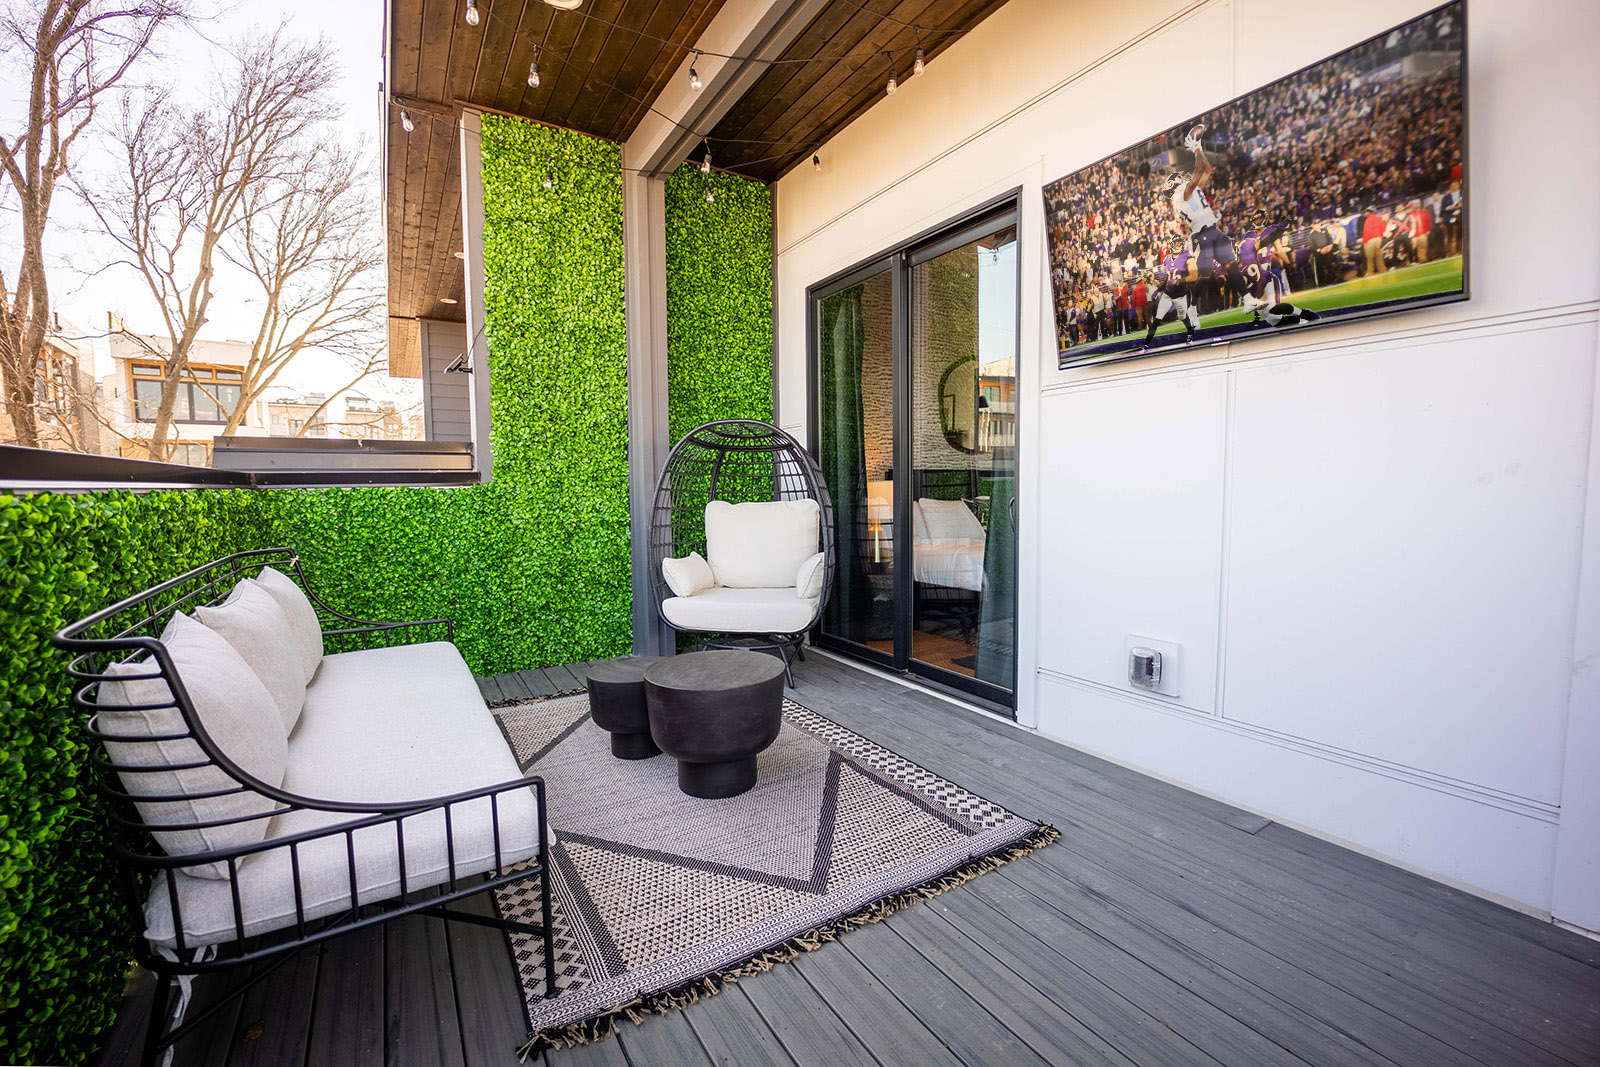 Rooftop deck with designer furnishings, 60 in flatscreen TV, outdoor BBQ, and bistro lights.